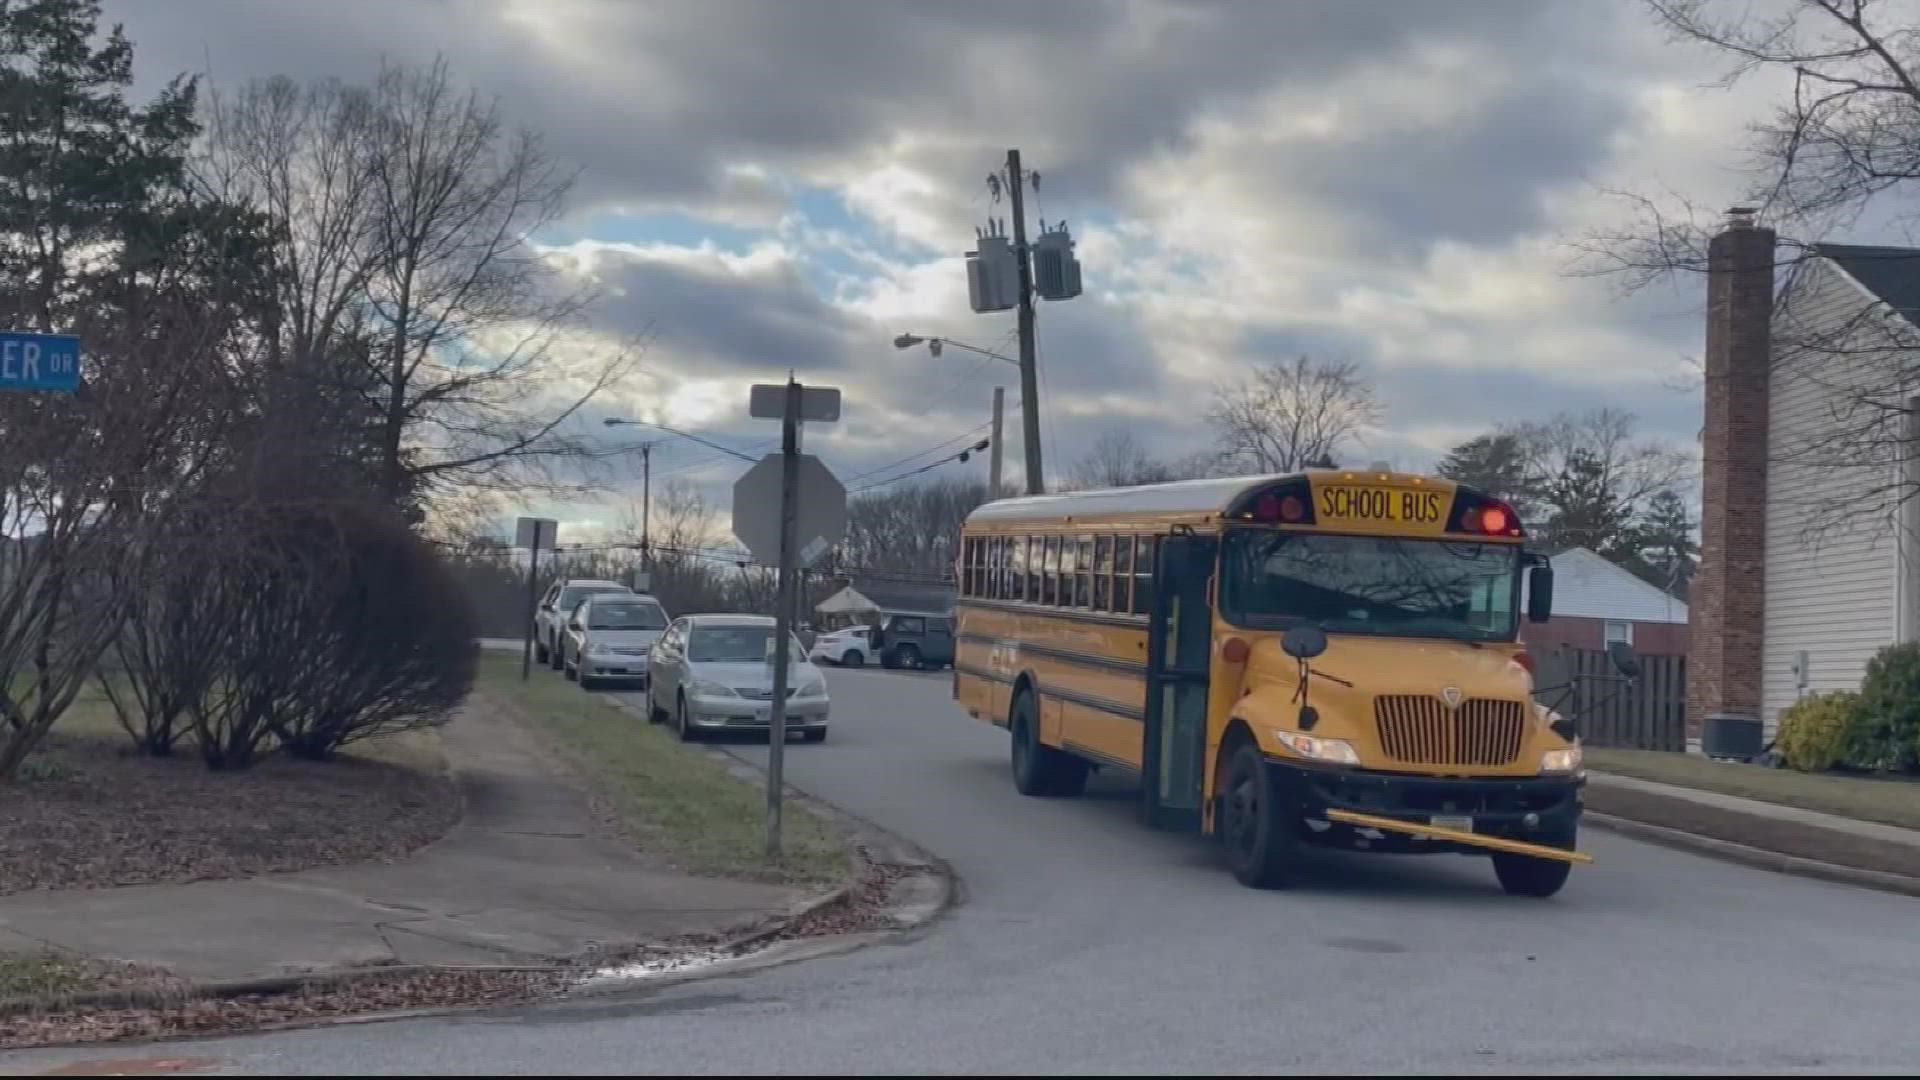 Parents in Fairfax County are worried about the location of a school bus stop. It's right in front of where a registered sex offender lives.